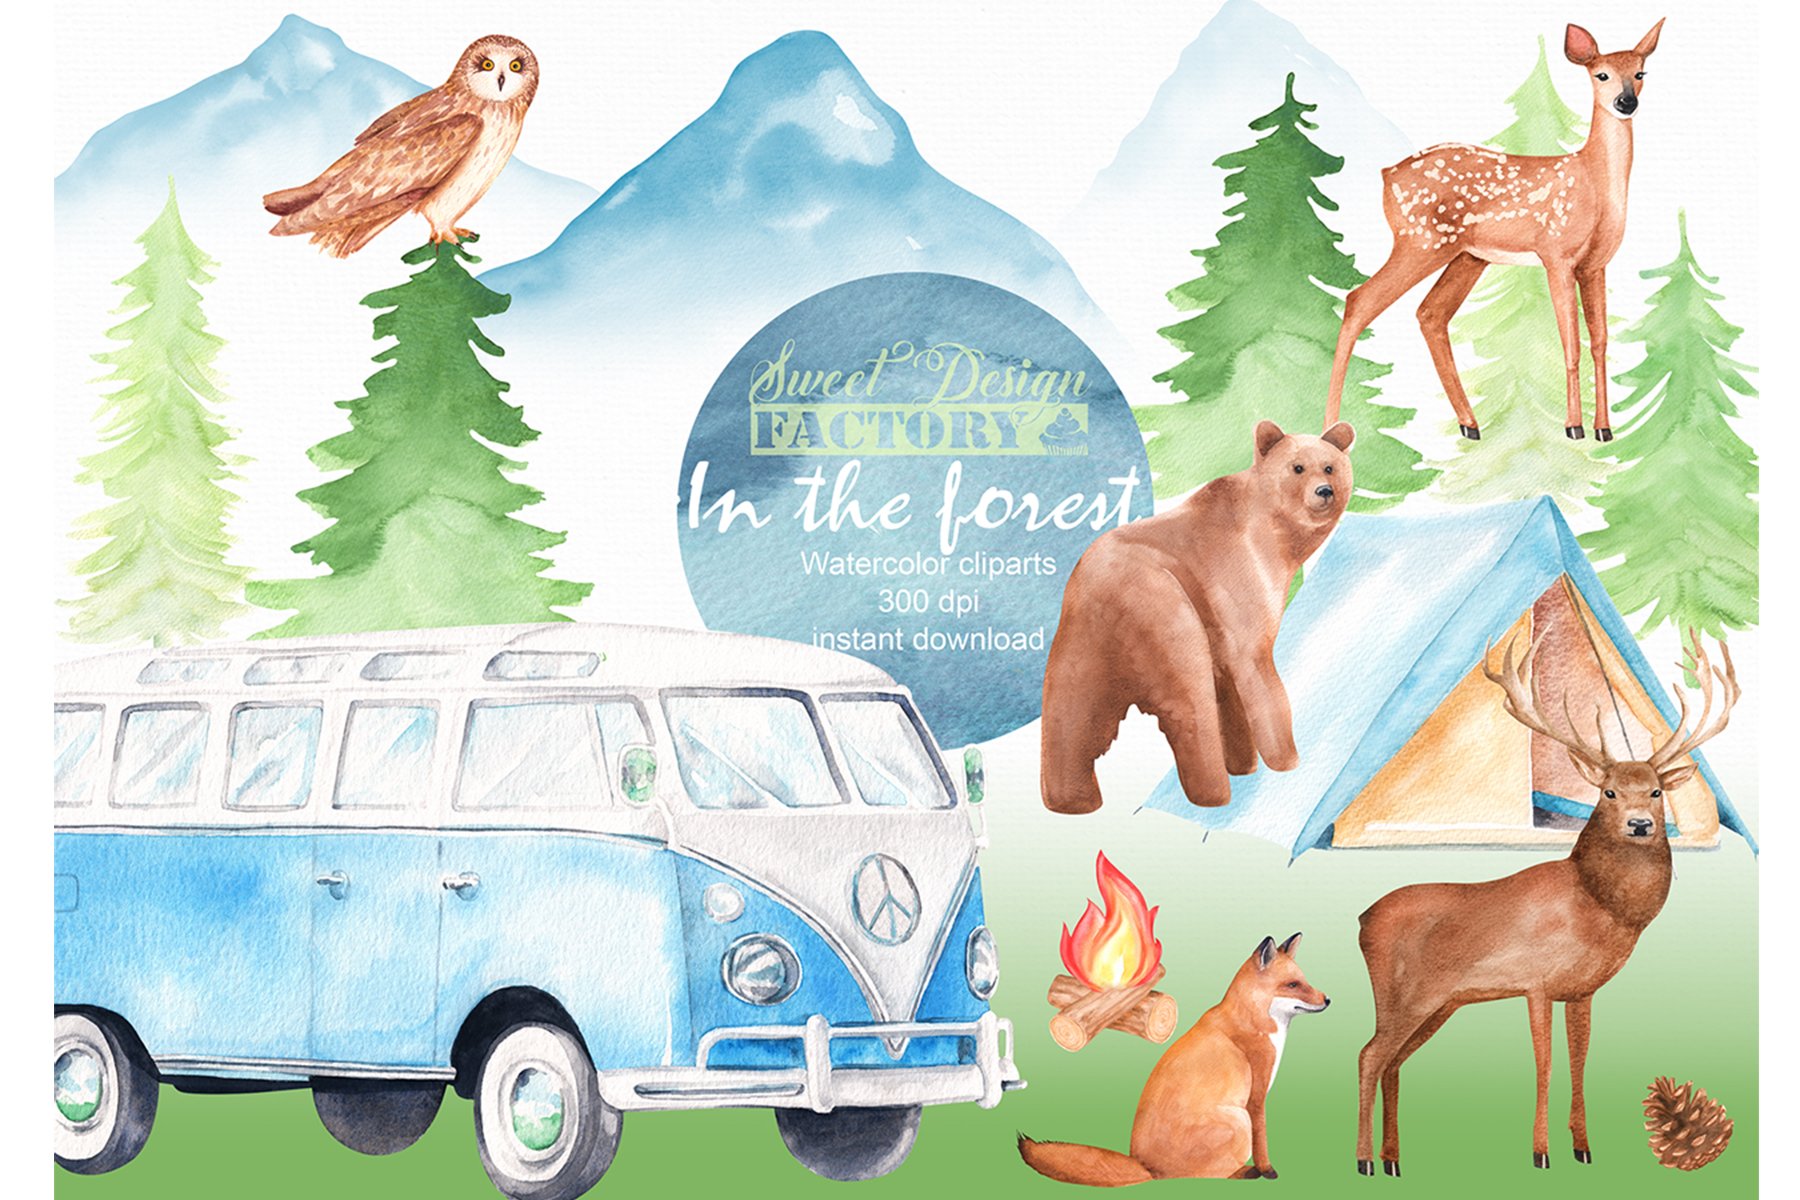 High quality camping illustration in a watercolor style.